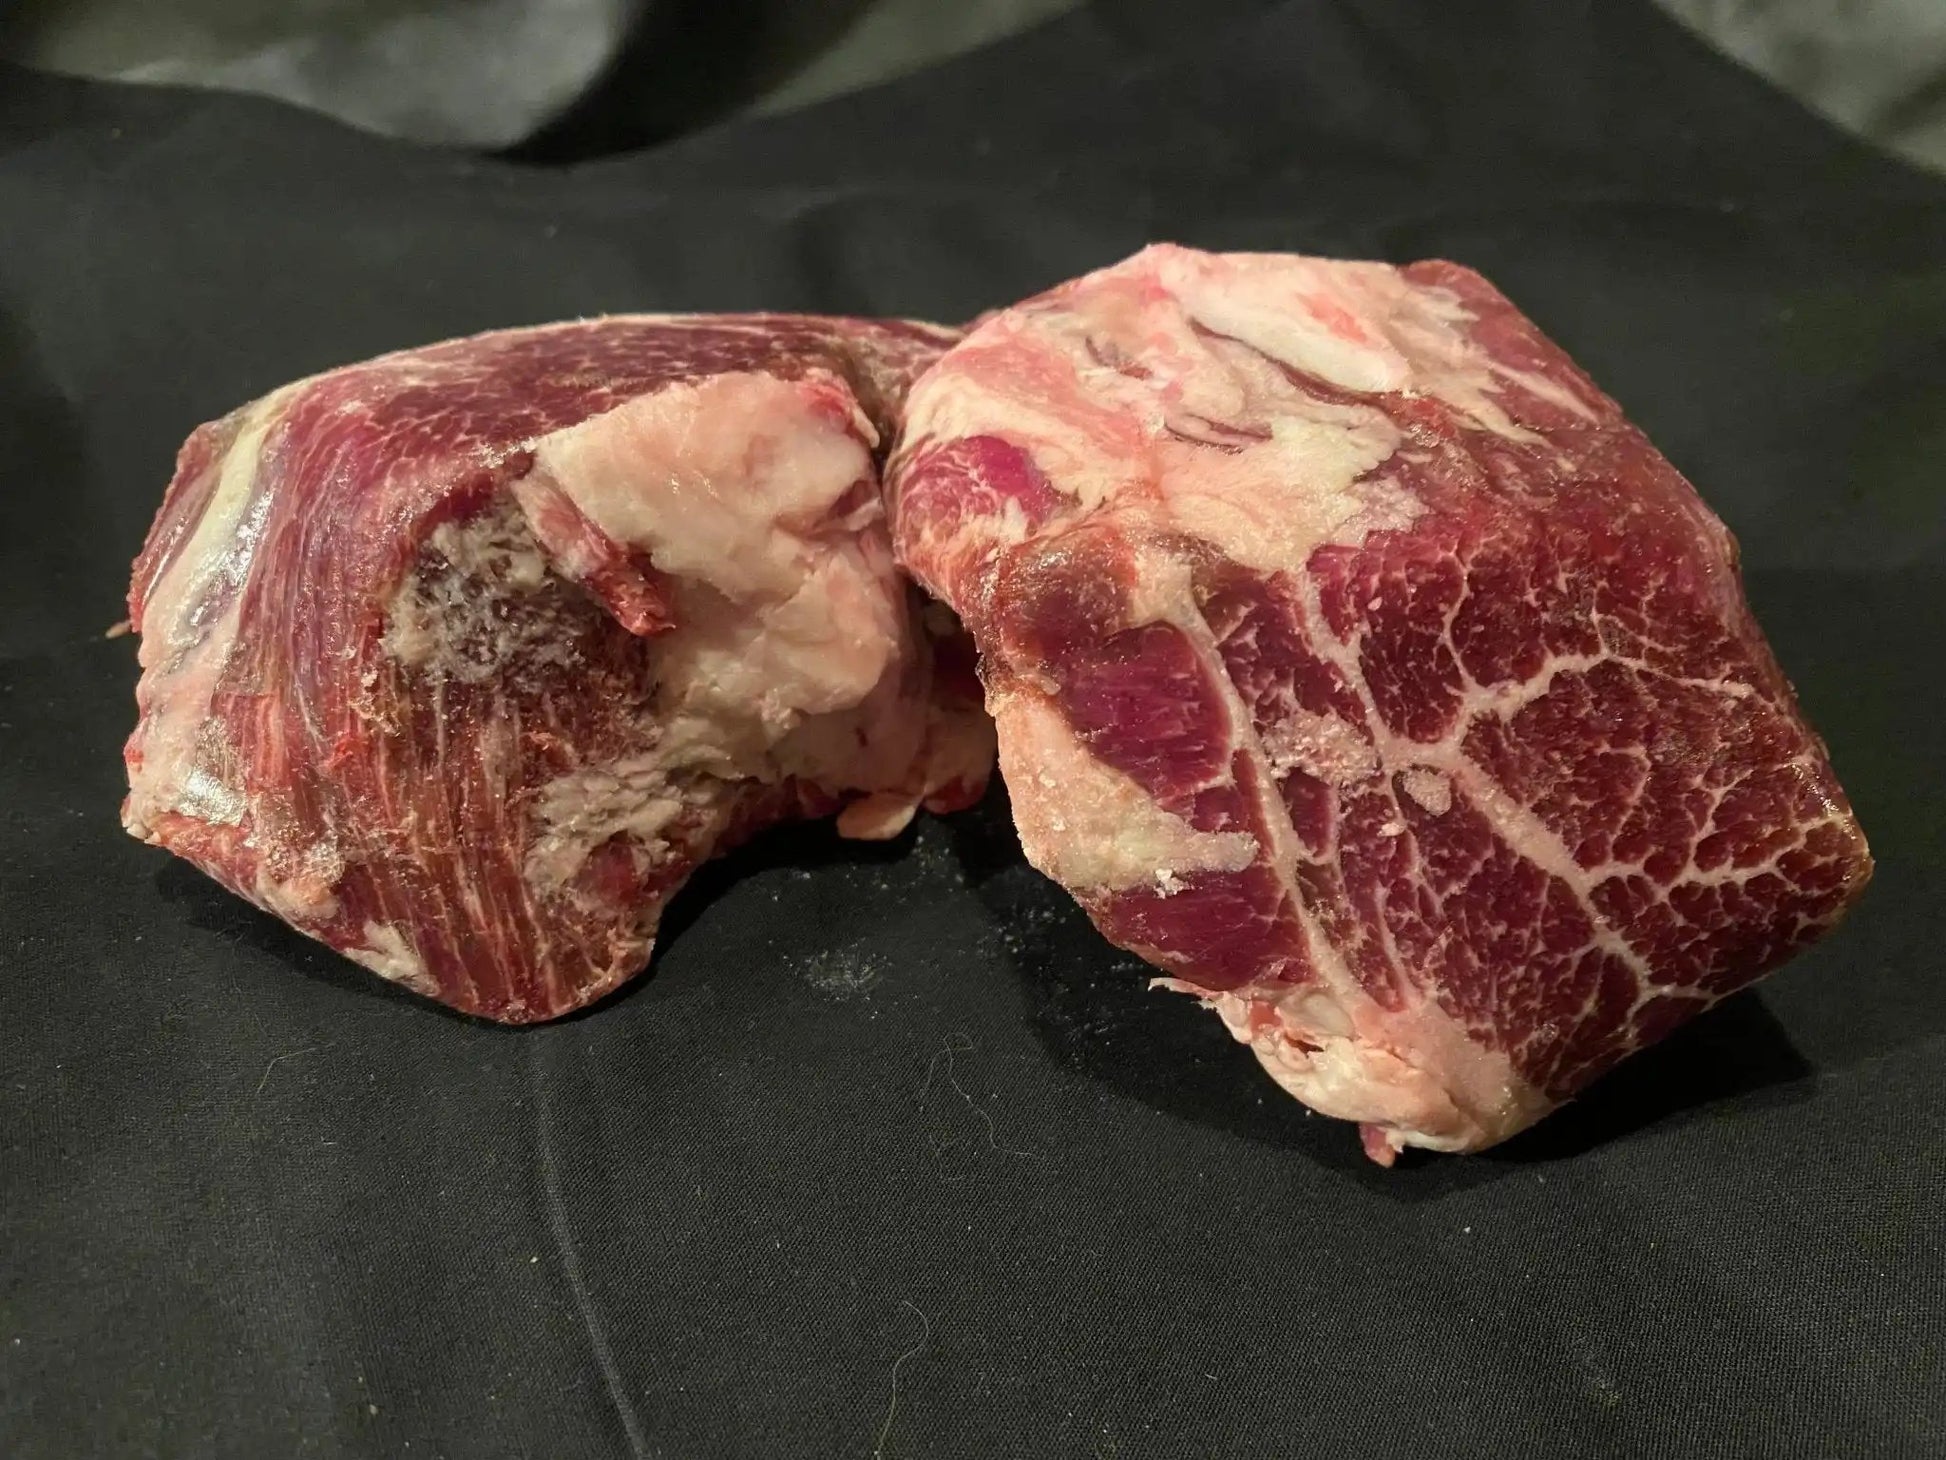 100% All-Natural Grass-Fed Pasture-Raised Wagyu Tenderloin Filet - The Hufeisen-Ranch (WYO Wagyu)